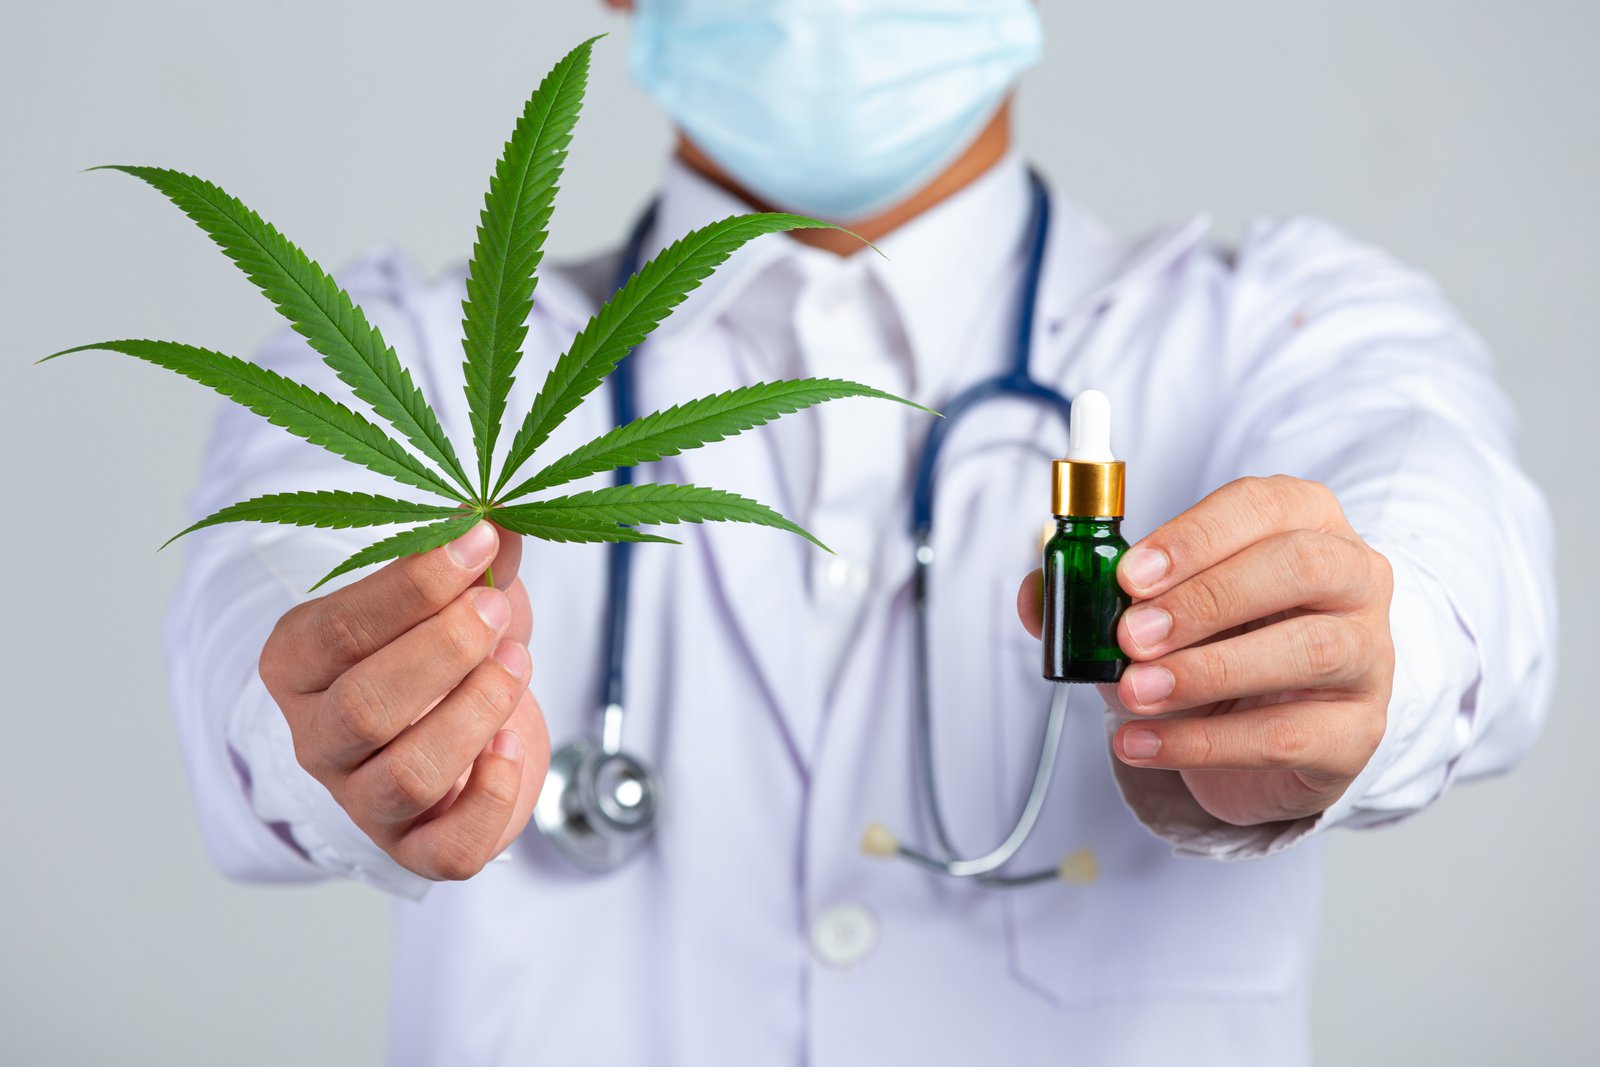 Cannabis Use Nearly Doubles Risk Of Severe COVID Infection, Hospitalization: Study